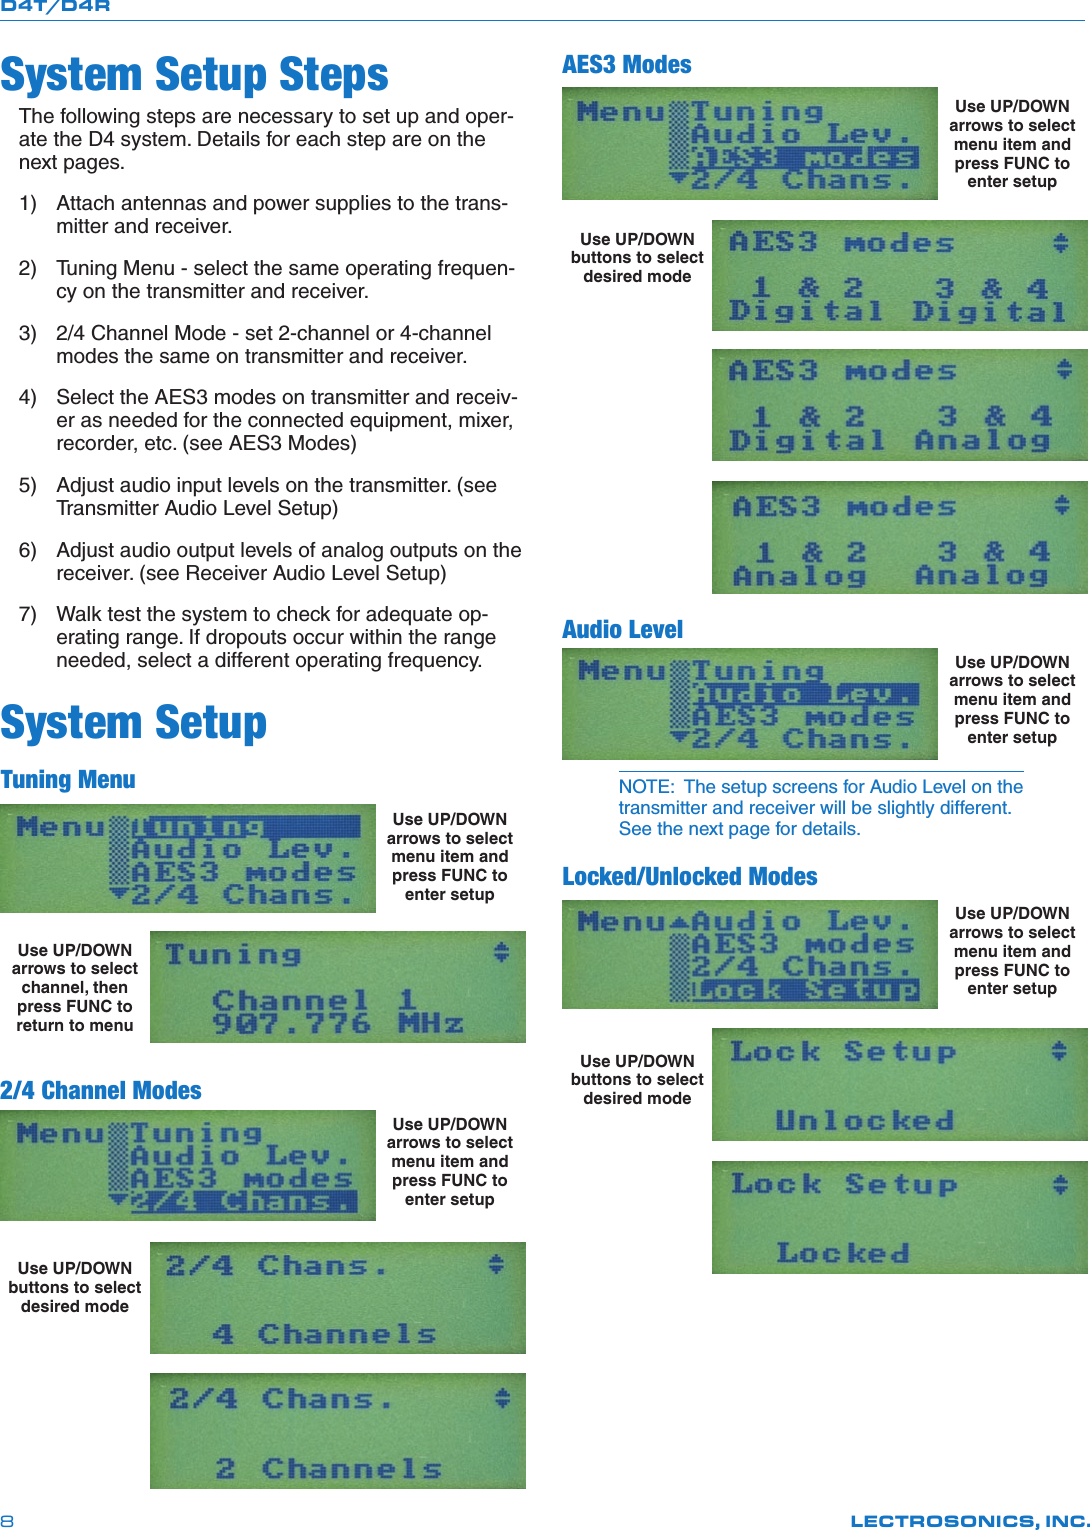 D4T/D4RLECTROSONICS, INC.8System Setup StepsThe following steps are necessary to set up and oper-ate the D4 system. Details for each step are on the next pages.1) Attachantennasandpowersuppliestothetrans-mitter and receiver.2) TuningMenu-selectthesameoperatingfrequen-cy on the transmitter and receiver.3) 2/4ChannelMode-set2-channelor4-channelmodes the same on transmitter and receiver.4) SelecttheAES3modesontransmitterandreceiv-er as needed for the connected equipment, mixer, recorder,etc.(seeAES3Modes)5) Adjustaudioinputlevelsonthetransmitter.(seeTransmitterAudioLevelSetup)6) Adjustaudiooutputlevelsofanalogoutputsonthereceiver.(seeReceiverAudioLevelSetup)7) Walktestthesystemtocheckforadequateop-erating range. If dropouts occur within the range needed, select a different operating frequency.System SetupTuning MenuUse UP/DOWN arrows to select menu item and press FUNC to enter setup Use UP/DOWN arrows to select channel, then press FUNC to return to menu 2/4 Channel ModesUse UP/DOWN arrows to select menu item and press FUNC to enter setup  Use UP/DOWN buttons to select desired mode  AES3 ModesUse UP/DOWN arrows to select menu item and press FUNC to enter setup Use UP/DOWN buttons to select desired mode      Audio LevelUse UP/DOWN arrows to select menu item and press FUNC to enter setupNOTE:  The setup screens for Audio Level on the transmitter and receiver will be slightly different. See the next page for details.Locked/Unlocked ModesUse UP/DOWN arrows to select menu item and press FUNC to enter setup  Use UP/DOWN buttons to select desired mode  